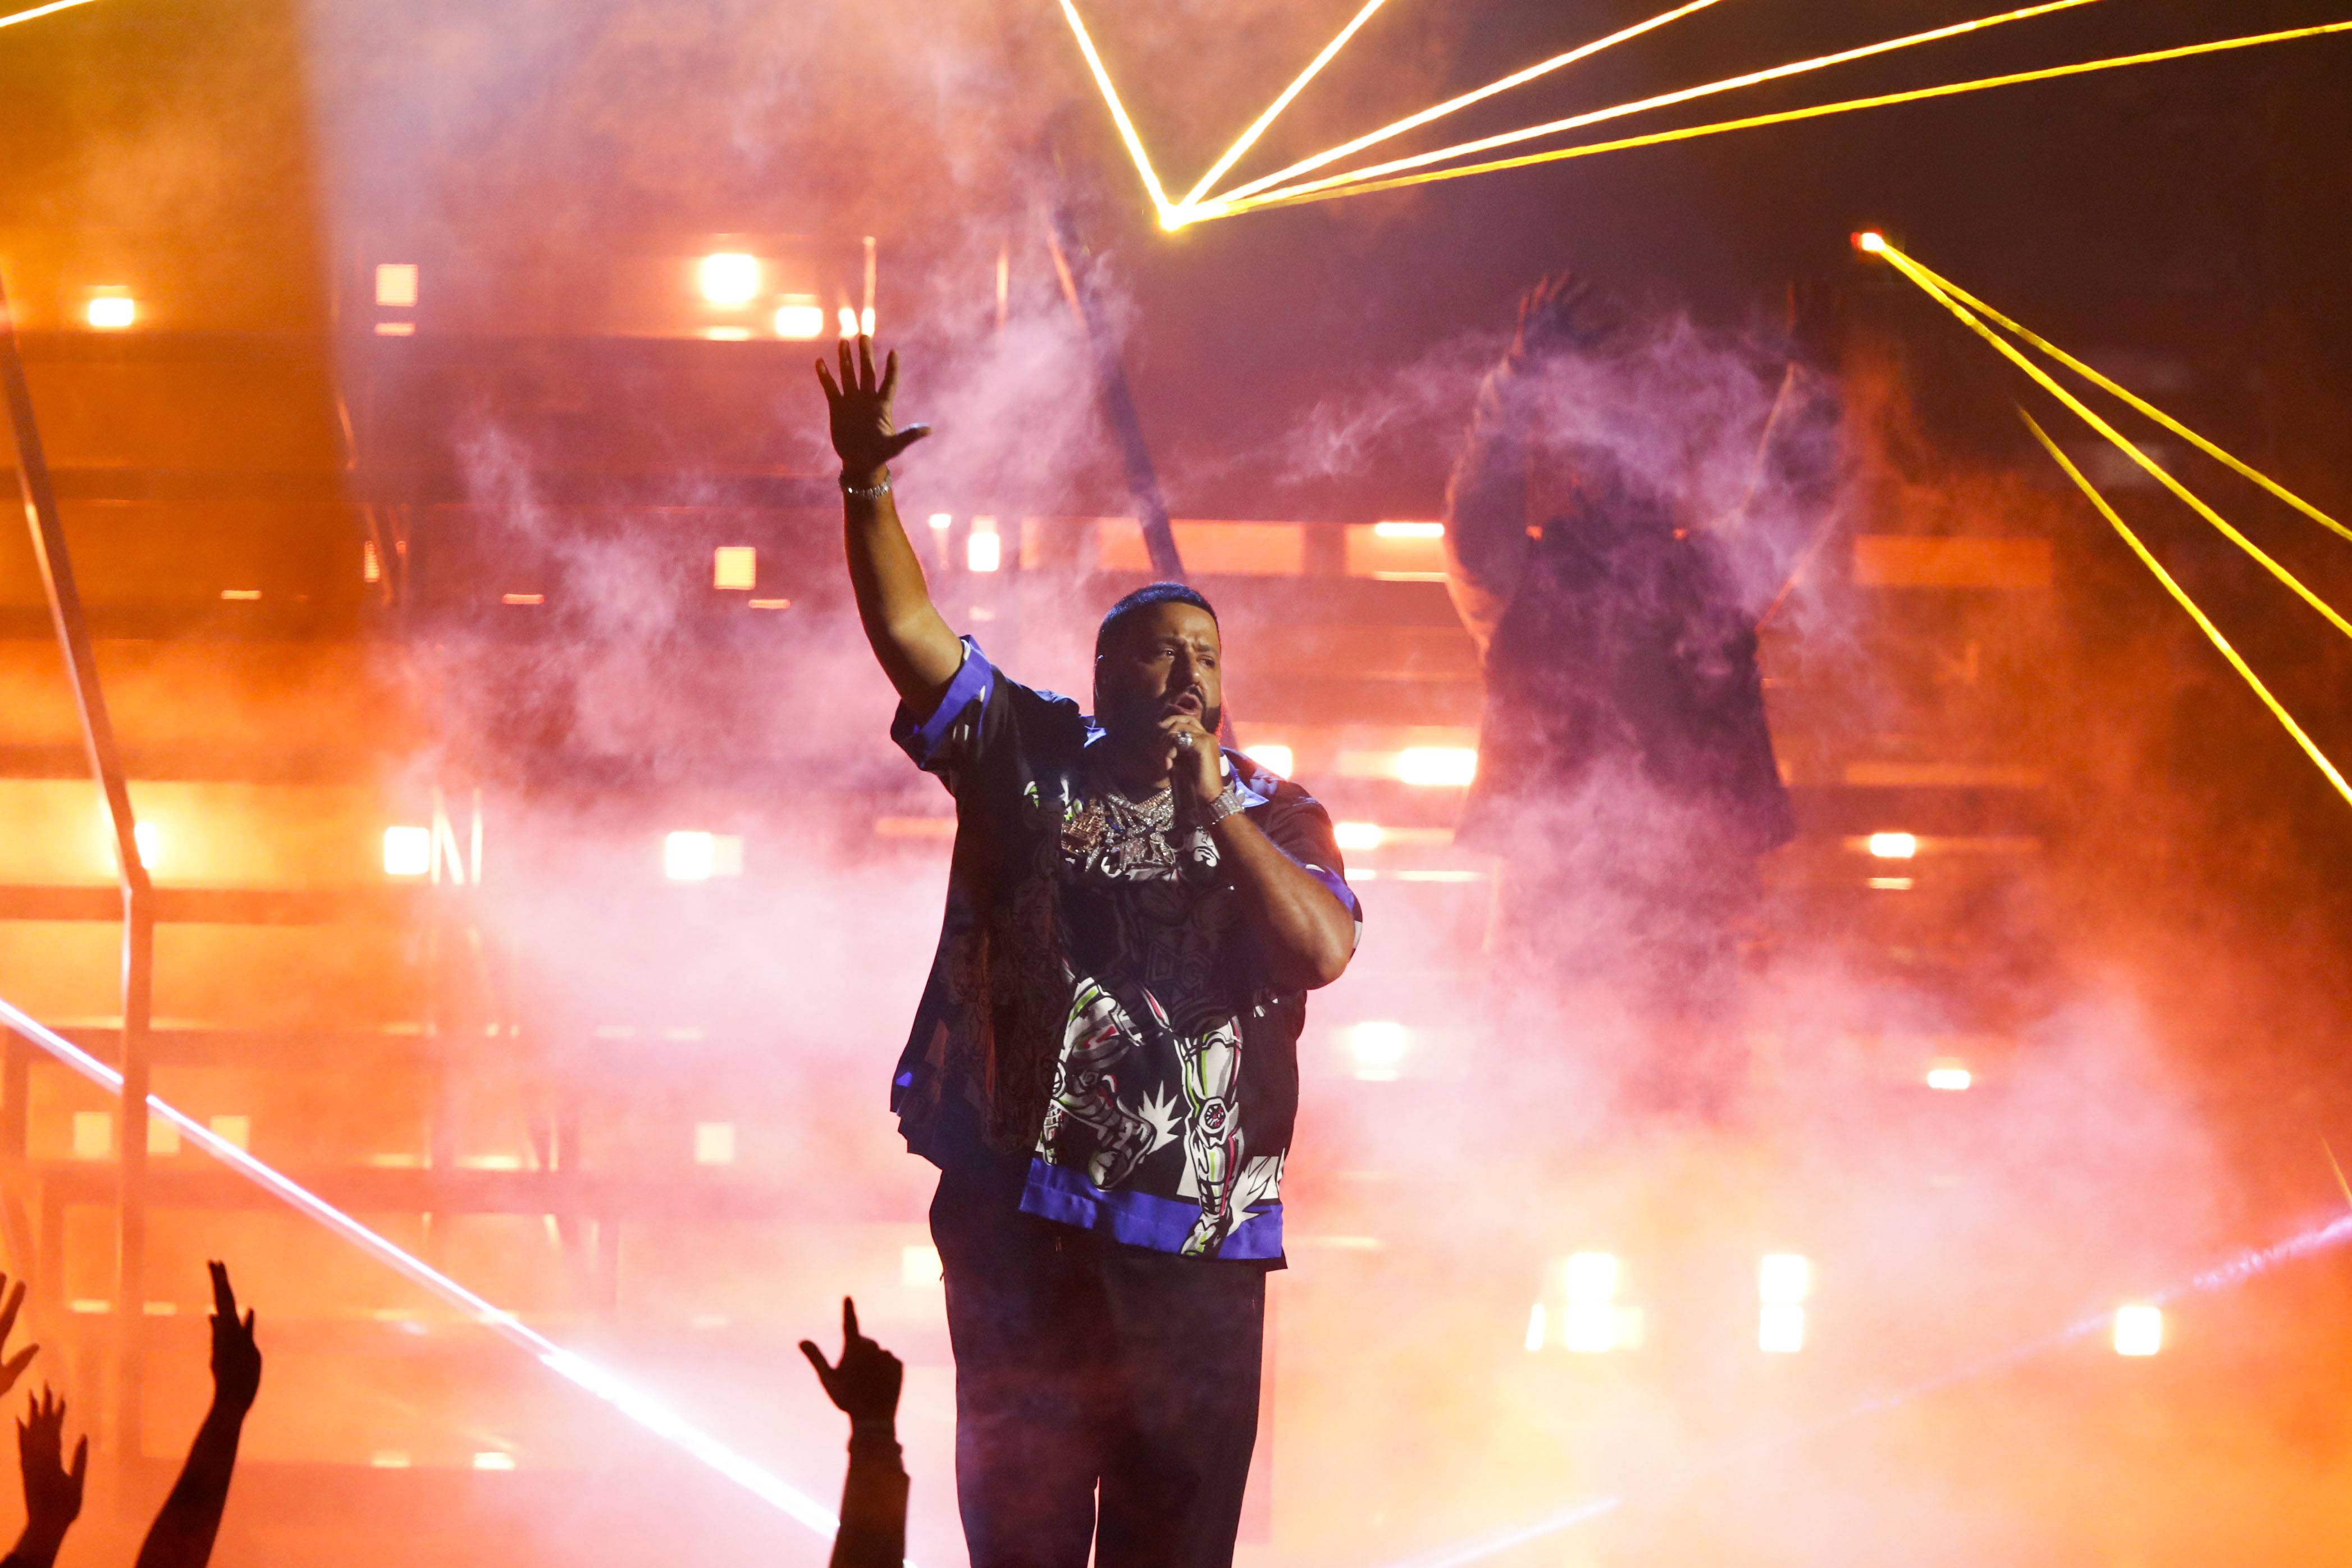 LOS ANGELES, CALIFORNIA - JUNE 27: DJ Khaled performs onstage at the BET Awards 2021 at Microsoft Theater on June 27, 2021 in Los Angeles, California. (Photo by Johnny Nunez/Getty Images for BET)